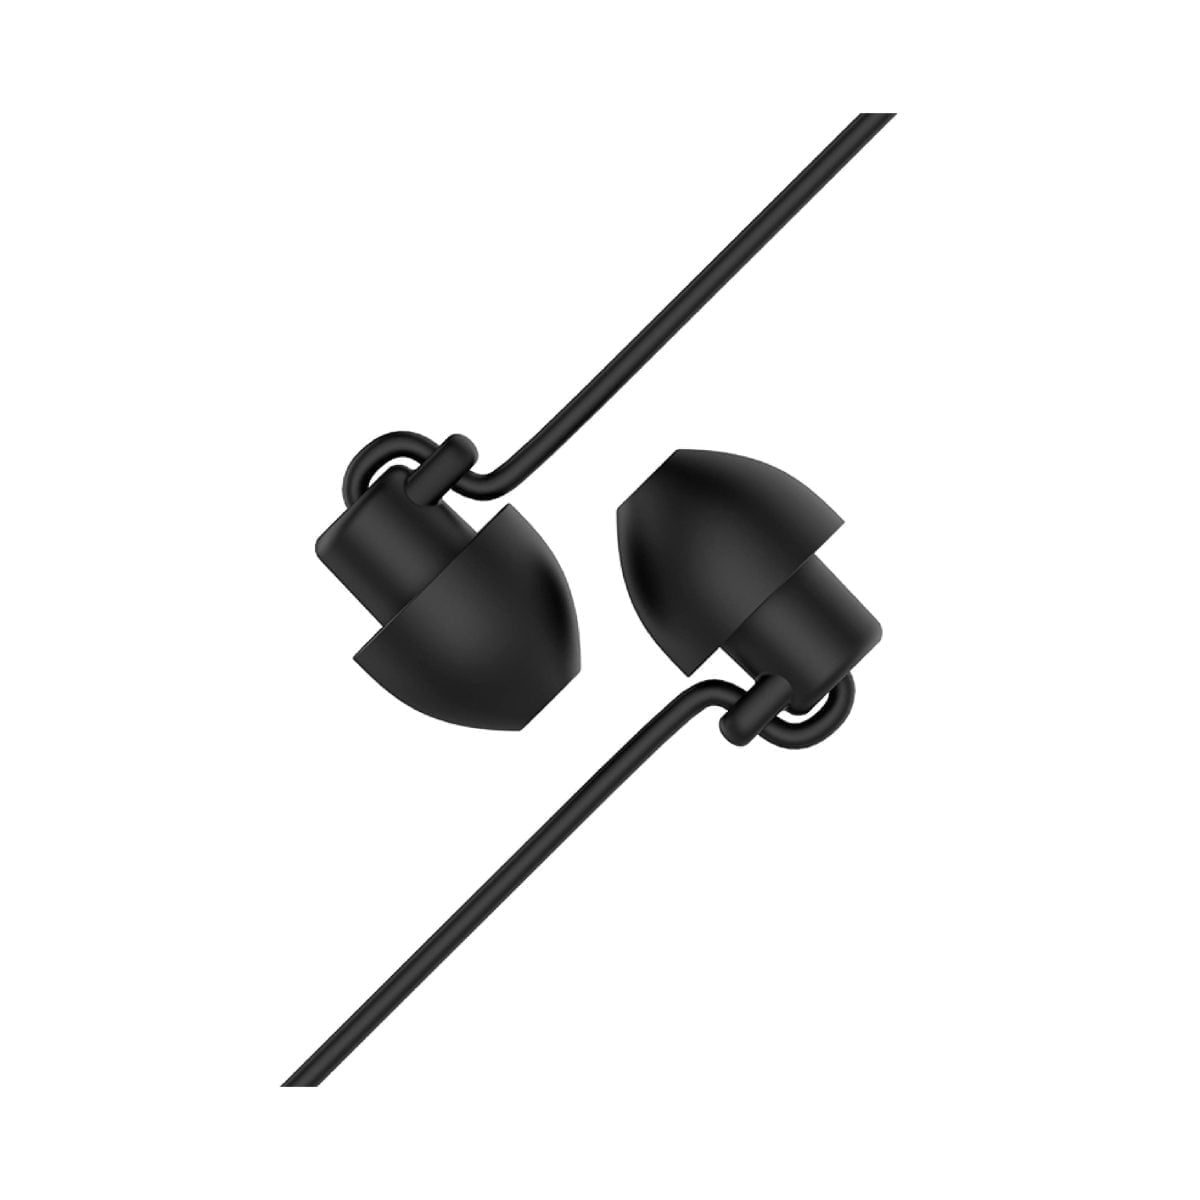 Earphone98 04 Scaled Hoco Material: Silica Gel, Tpe Enameled Wire Length: 1.2M, Weight: 10G Speaker: 6Mm Connector: 3.5Mm Microphone: With A Wheat Controller Wire Control: Single Button Control Silicone Material, Soft And Does Not Oppress The Ear, Suitable For Sleeping Silicon Sleep Earphones M56 Earphone Wired Headphones With Mic - Black Silicon Sleep Earphones M56 Earphone Wired Headphones With Mic - Black